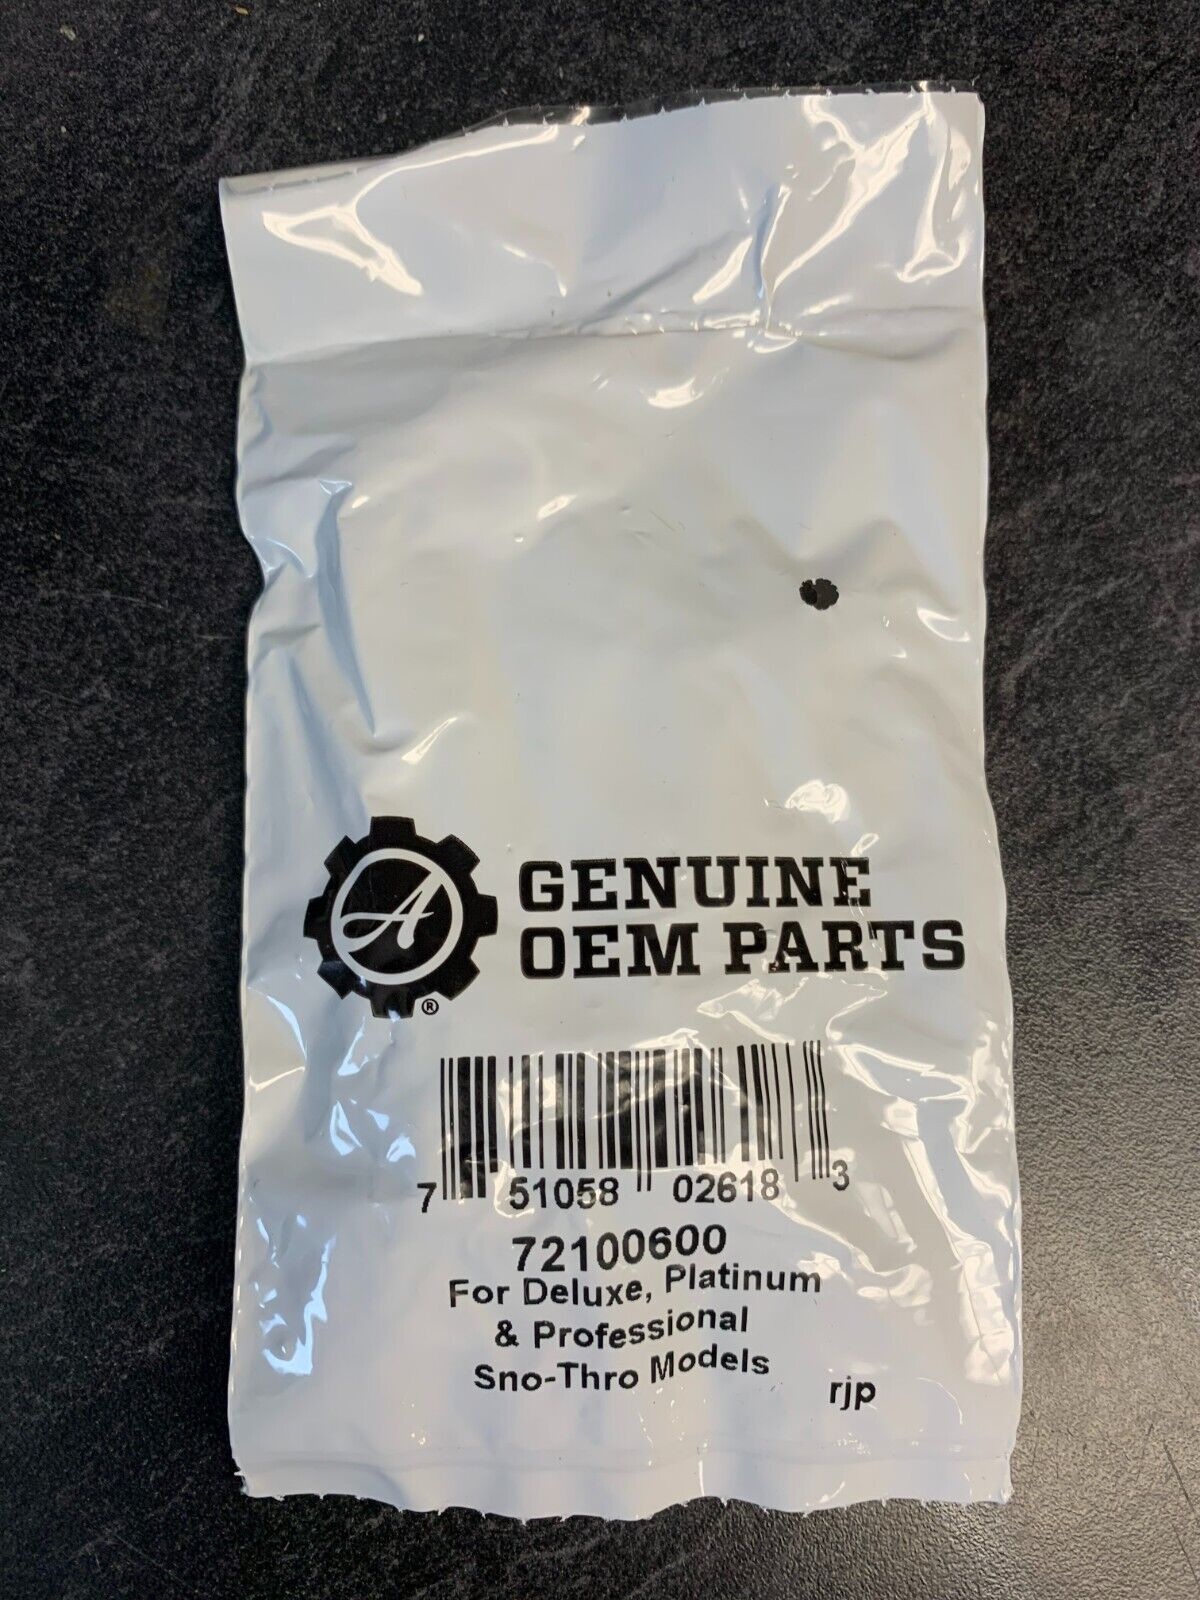 Genuine Oem Parts - Shear Pins And Nuts For Sno-trho Models - 72100600